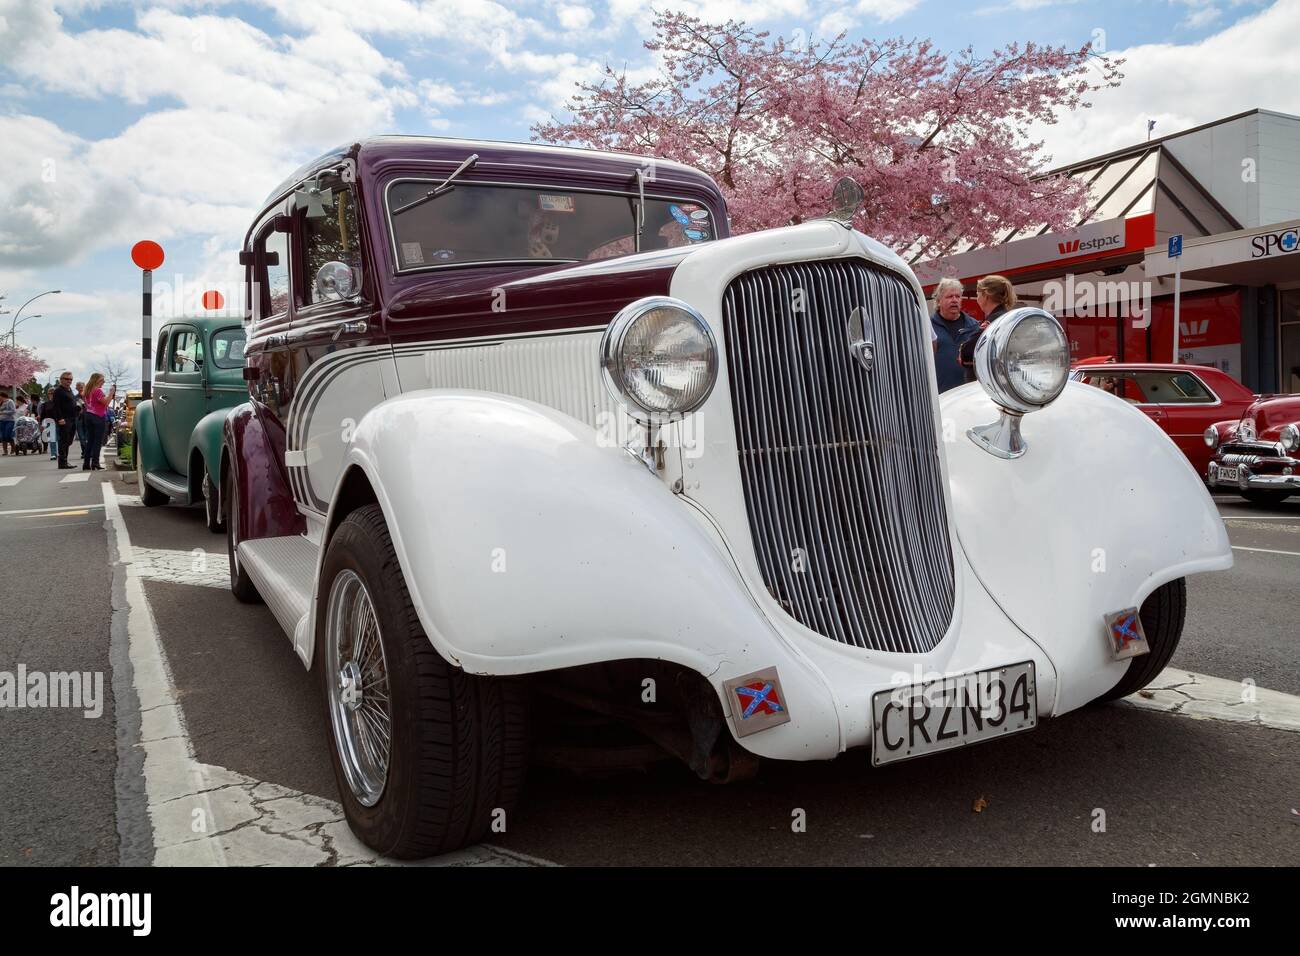 A 1935 Chrysler Plymouth, an American automobile, at a classic car show Stock Photo